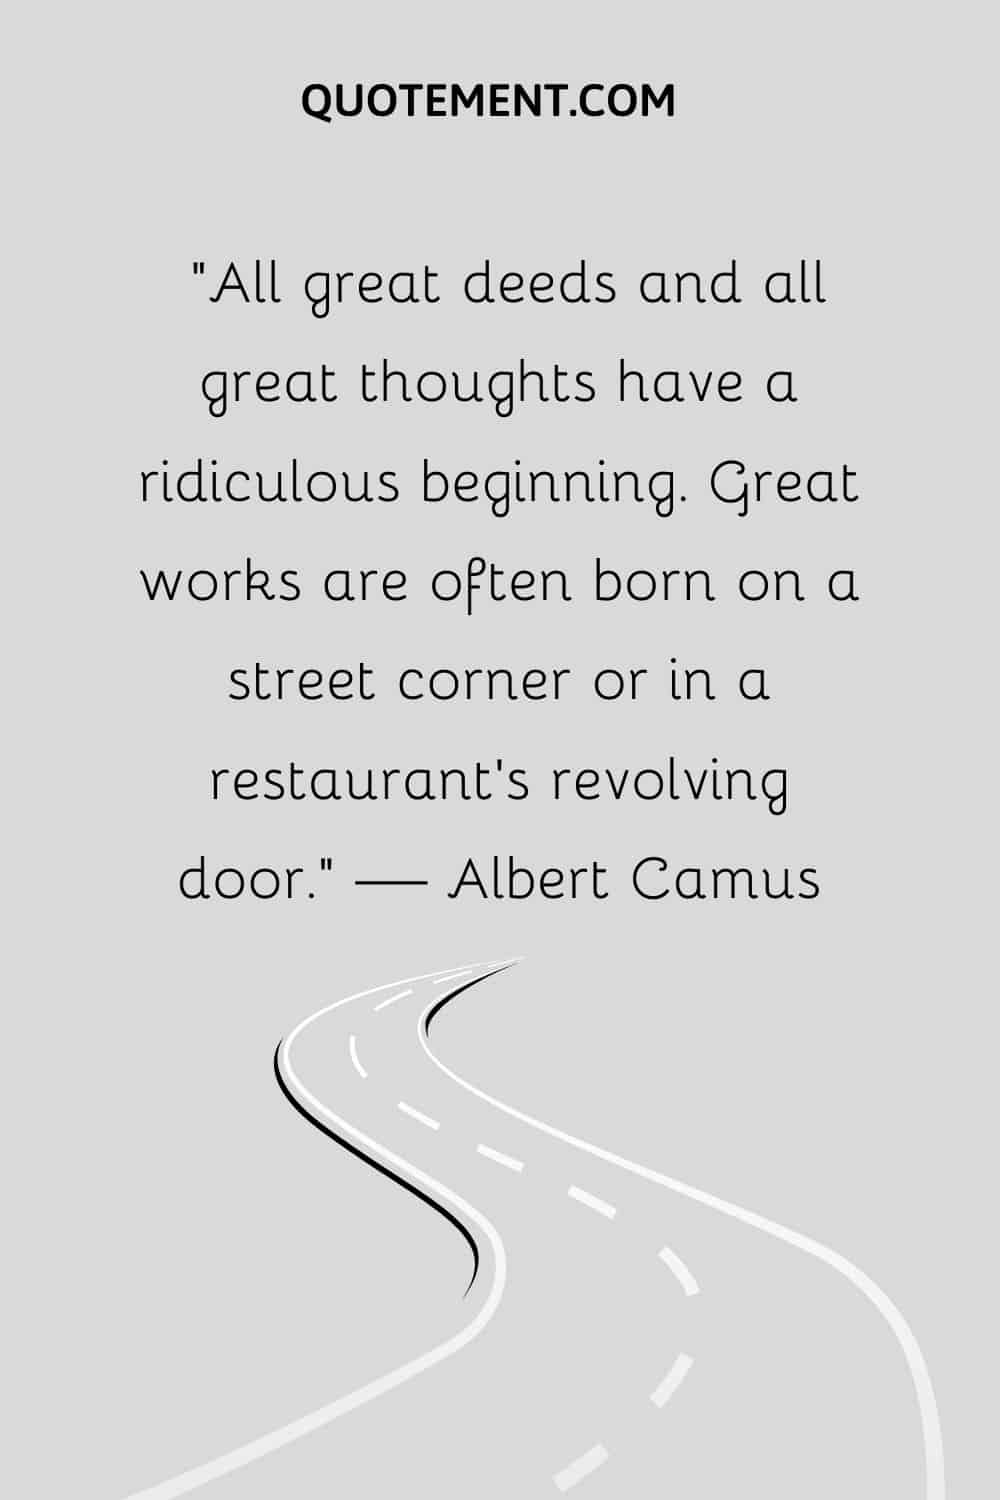 All great deeds and all great thoughts have a ridiculous beginning